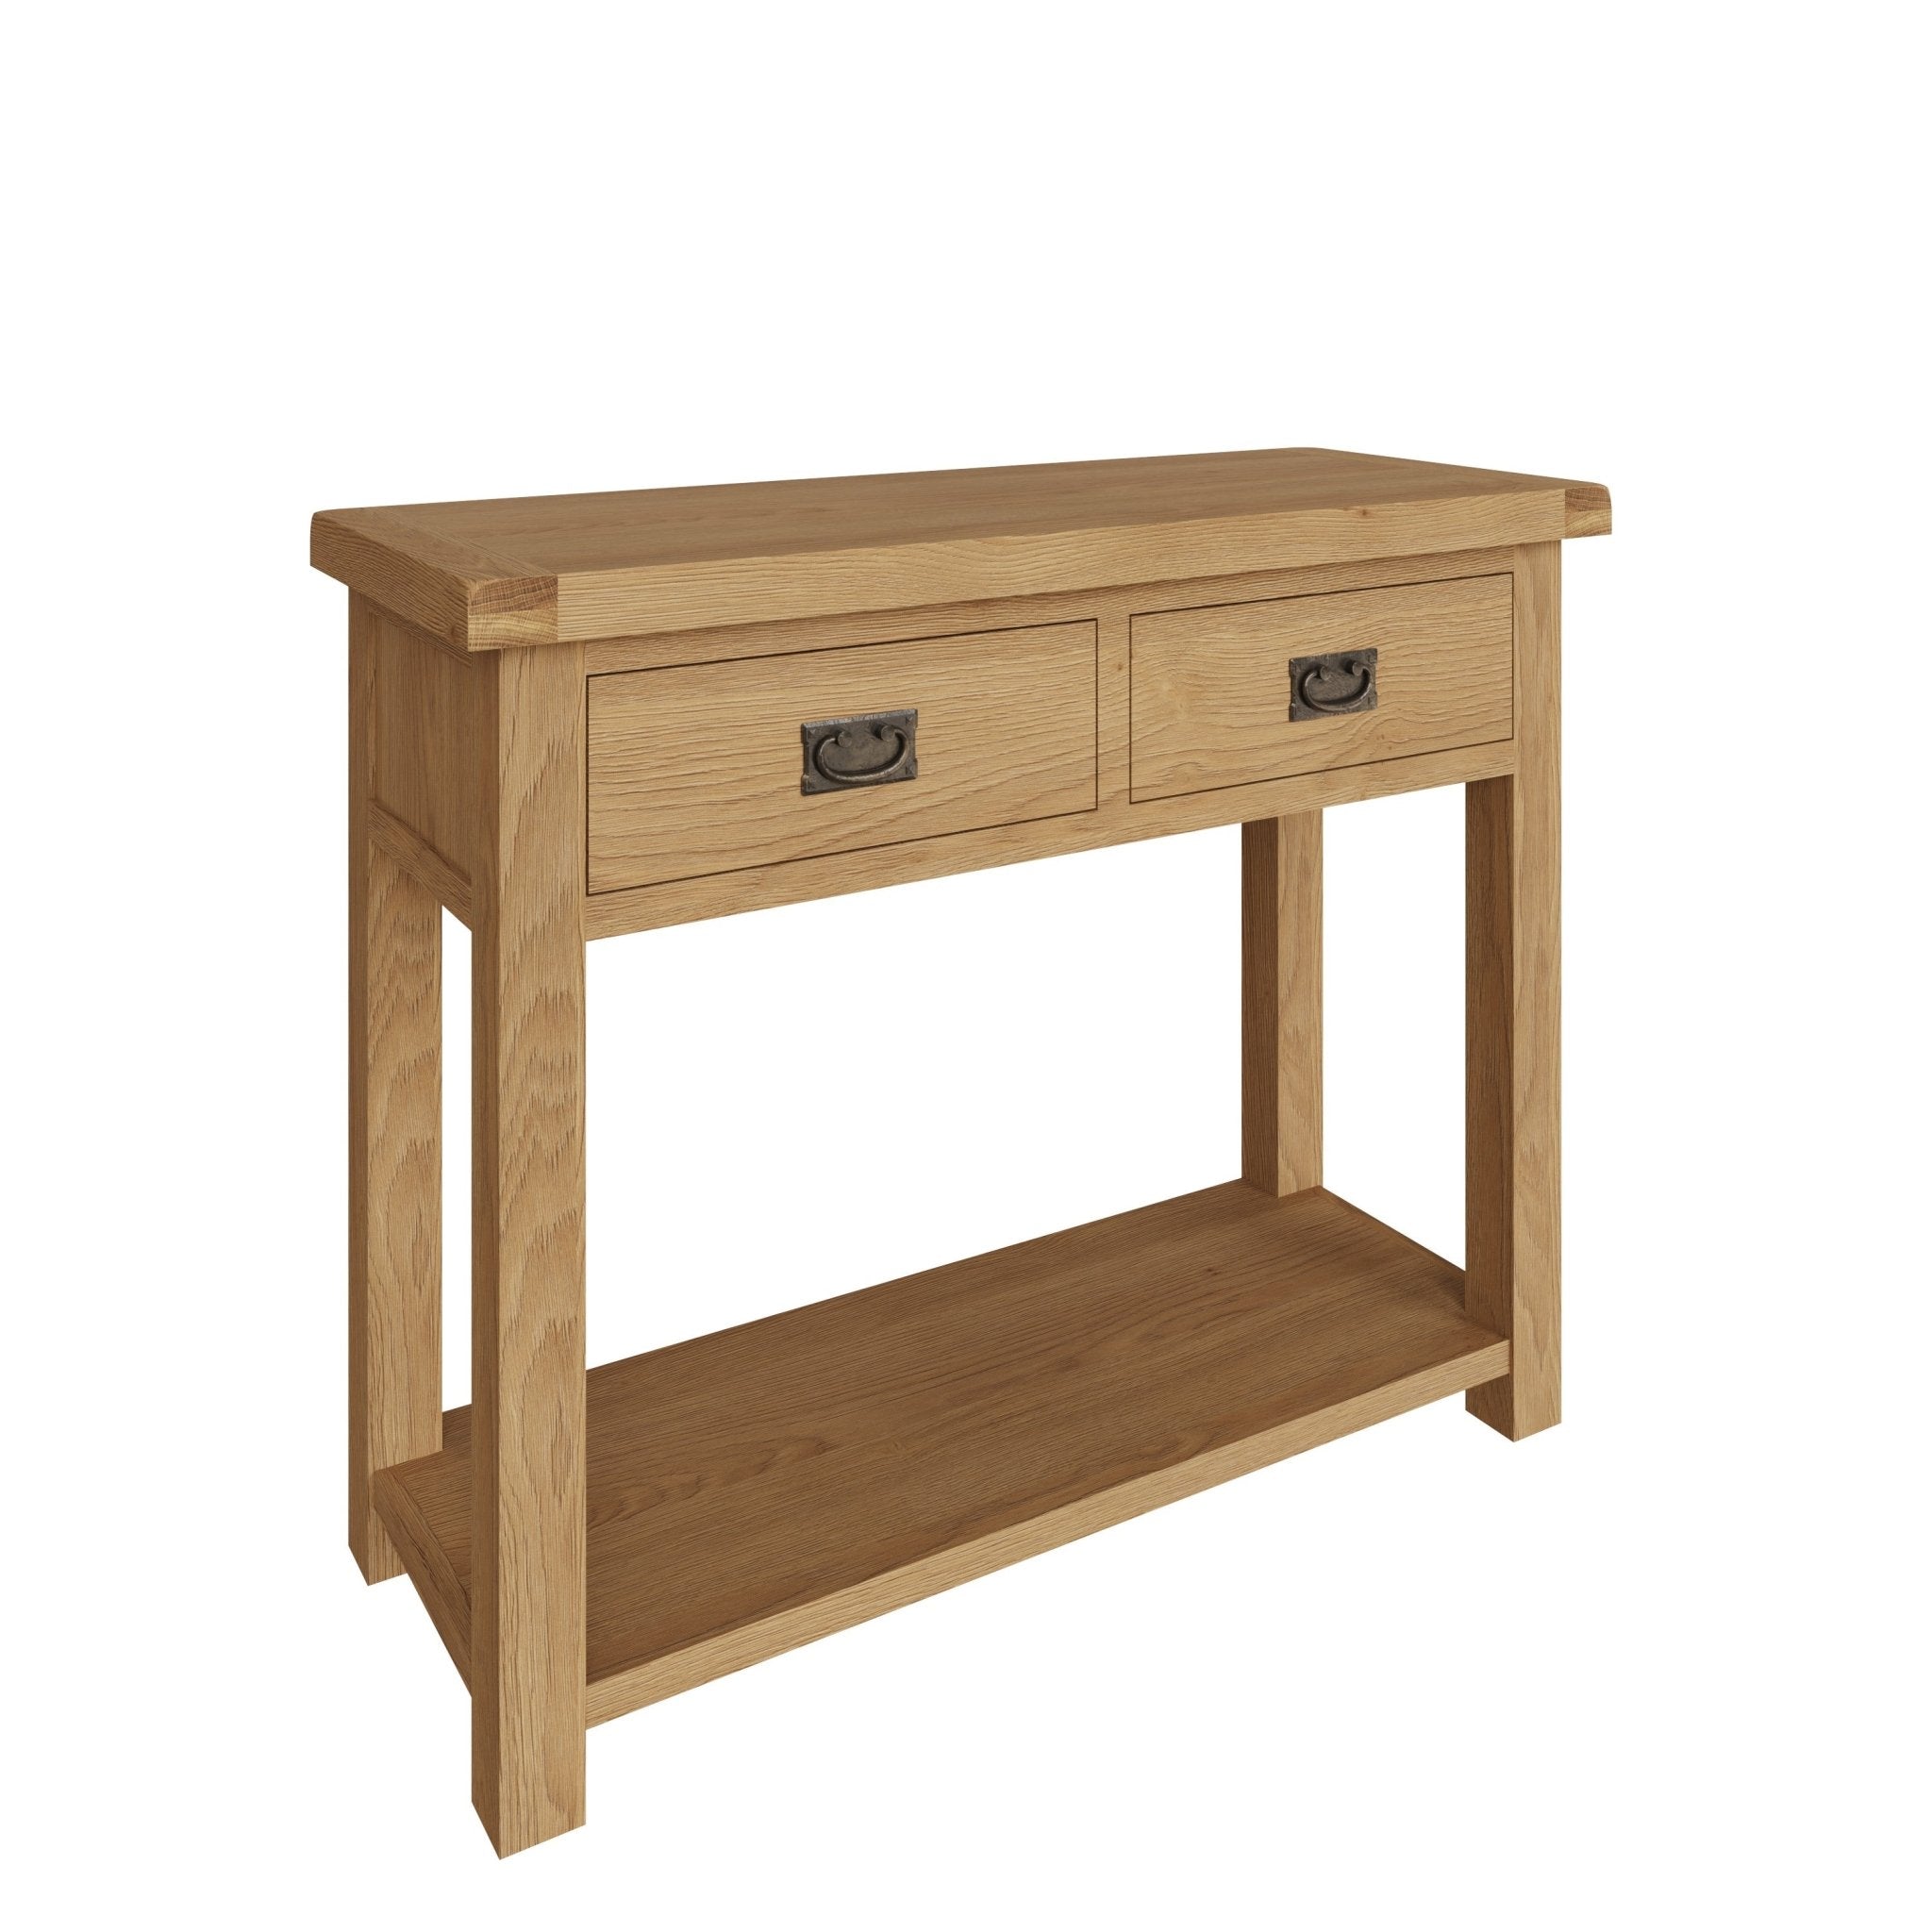 Kirdford Oak Console Table with Drawers - Duck Barn Interiors